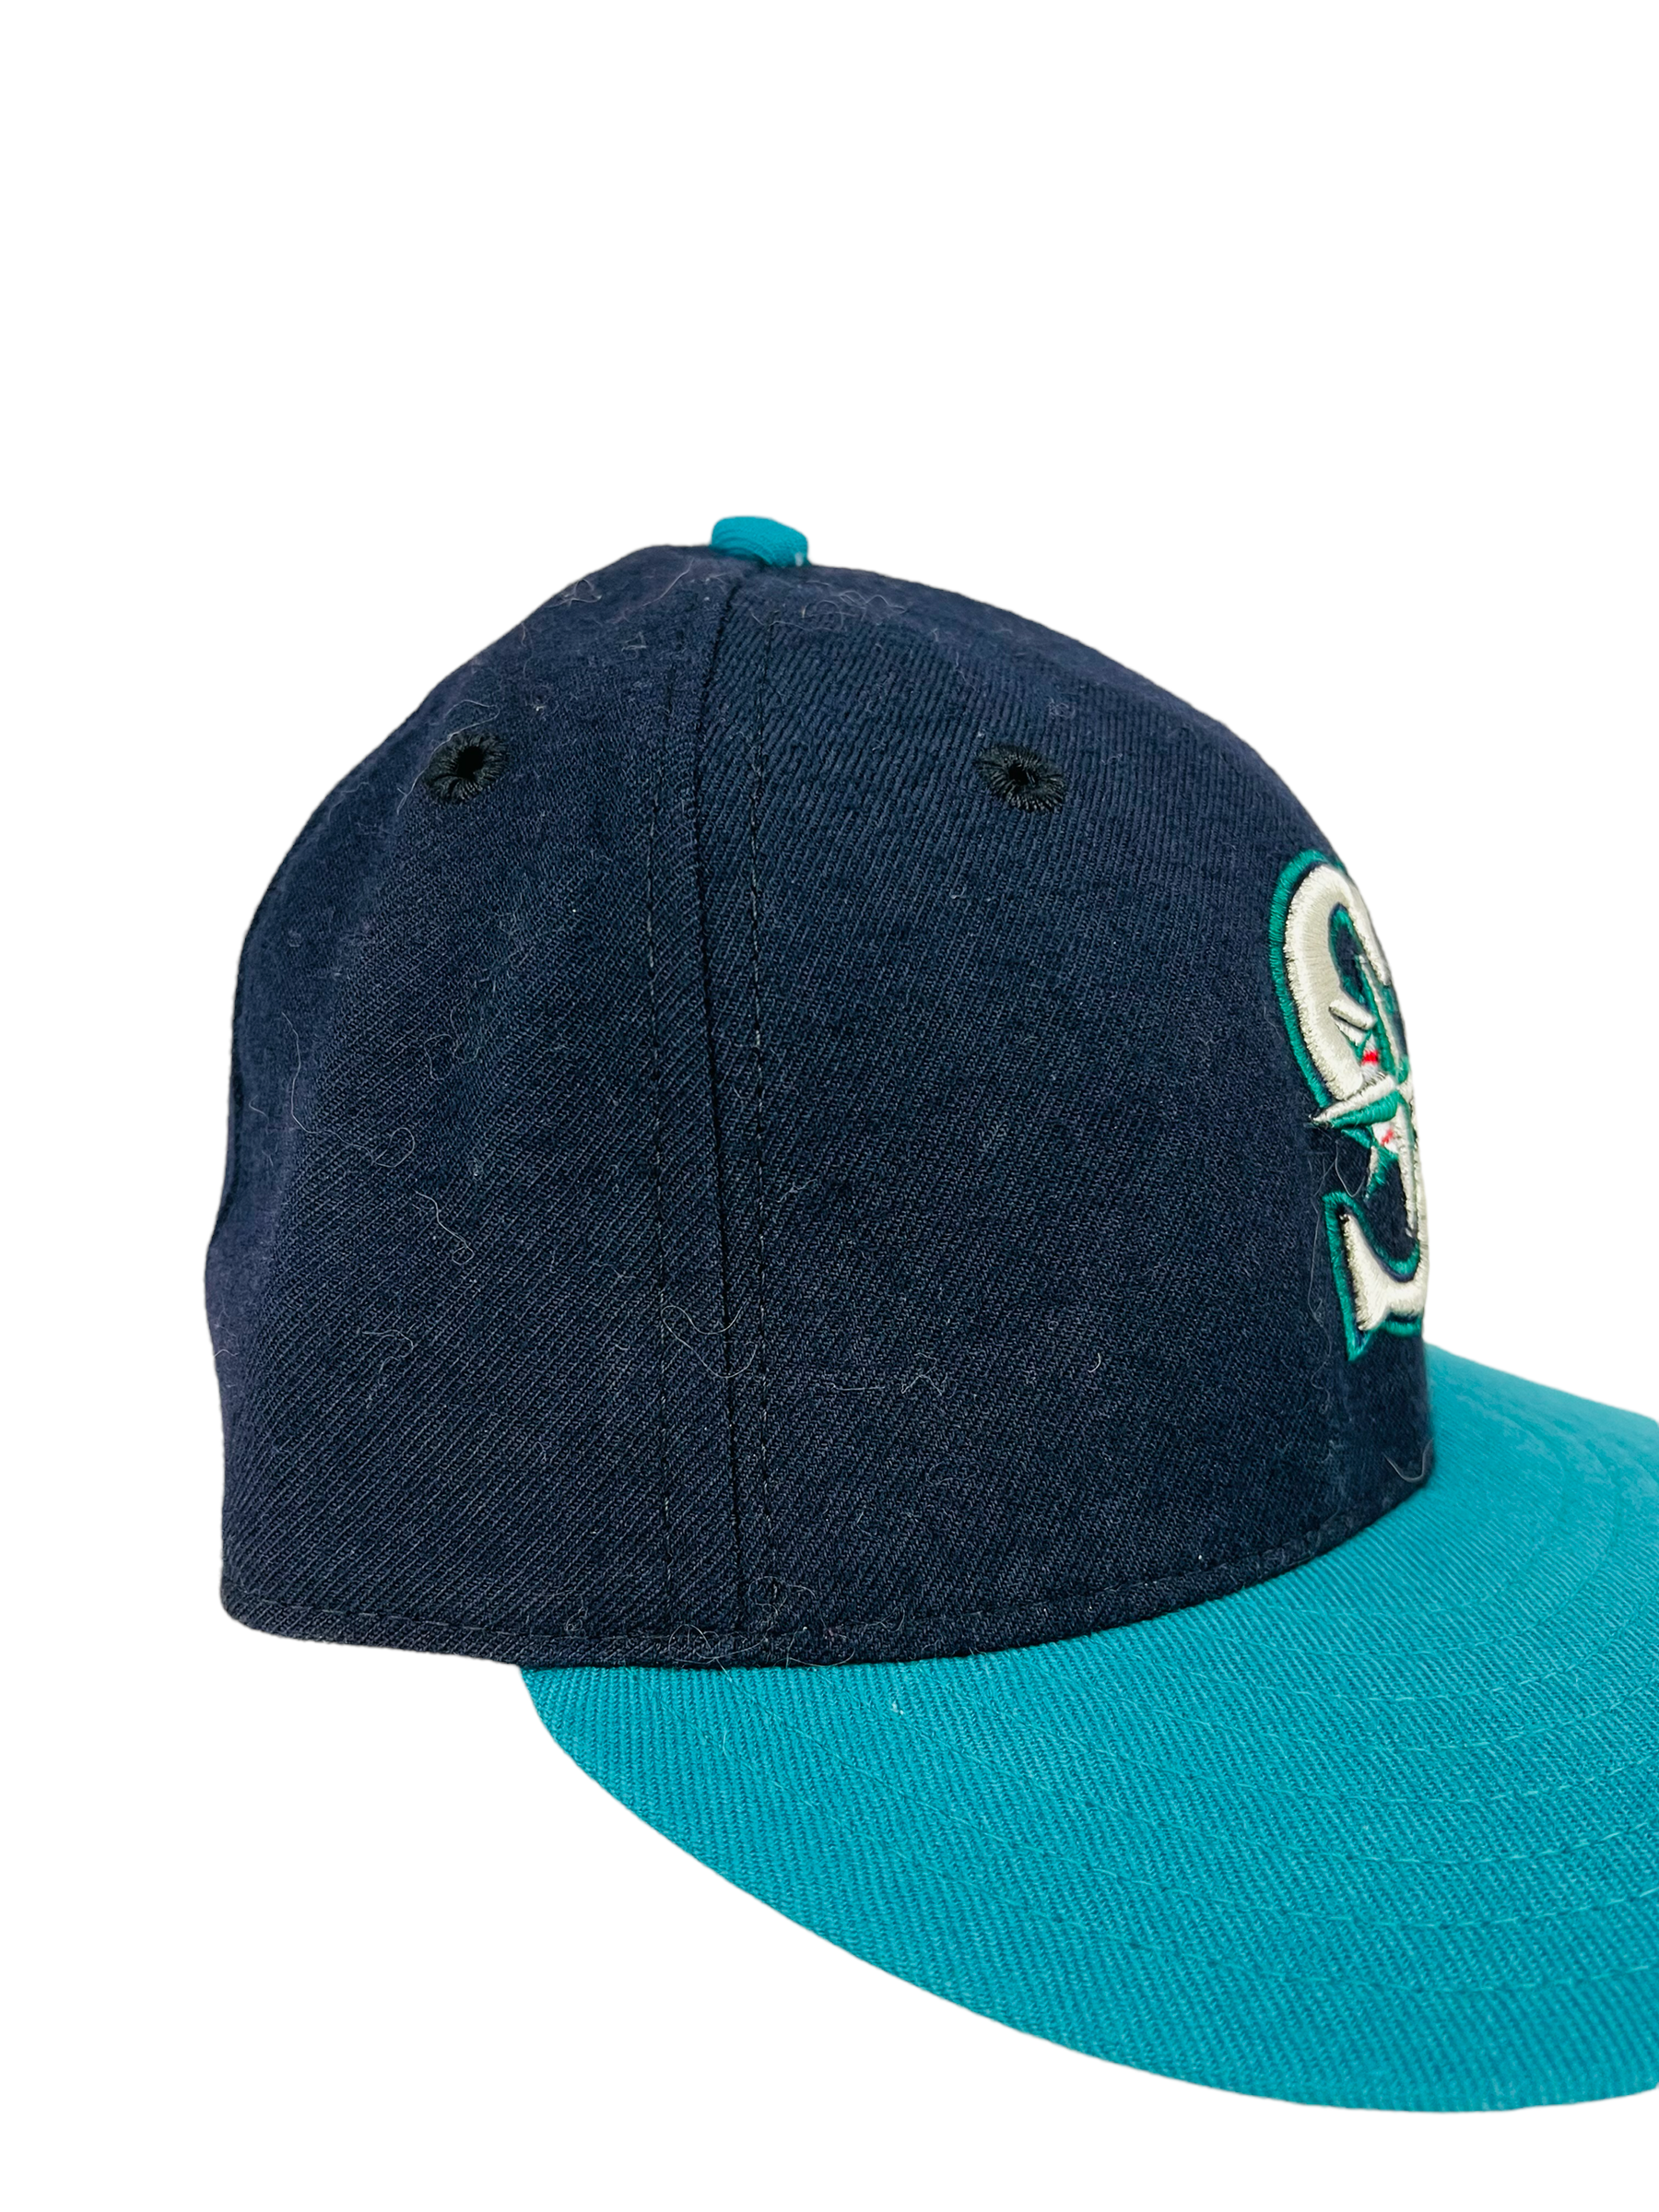 Seattle Mariners Cooperstown Collection, Throwback Mariners